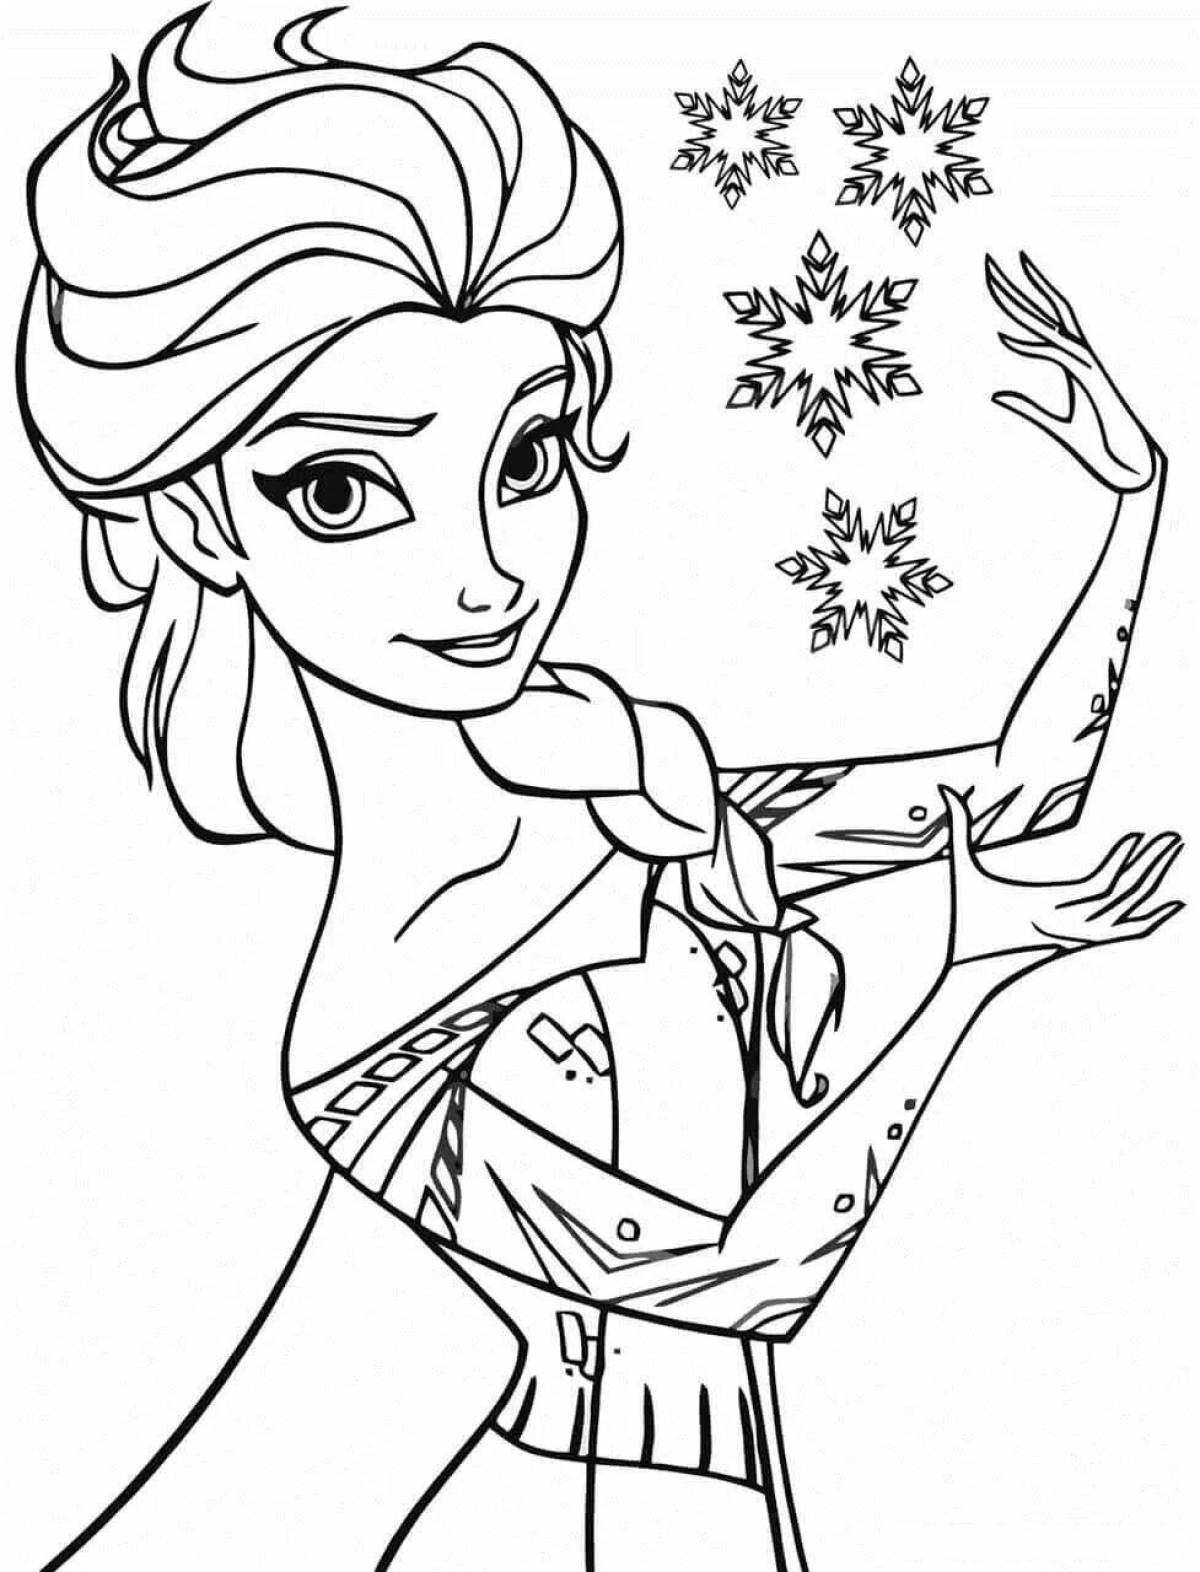 Frozen coloring book for 5-6 year olds